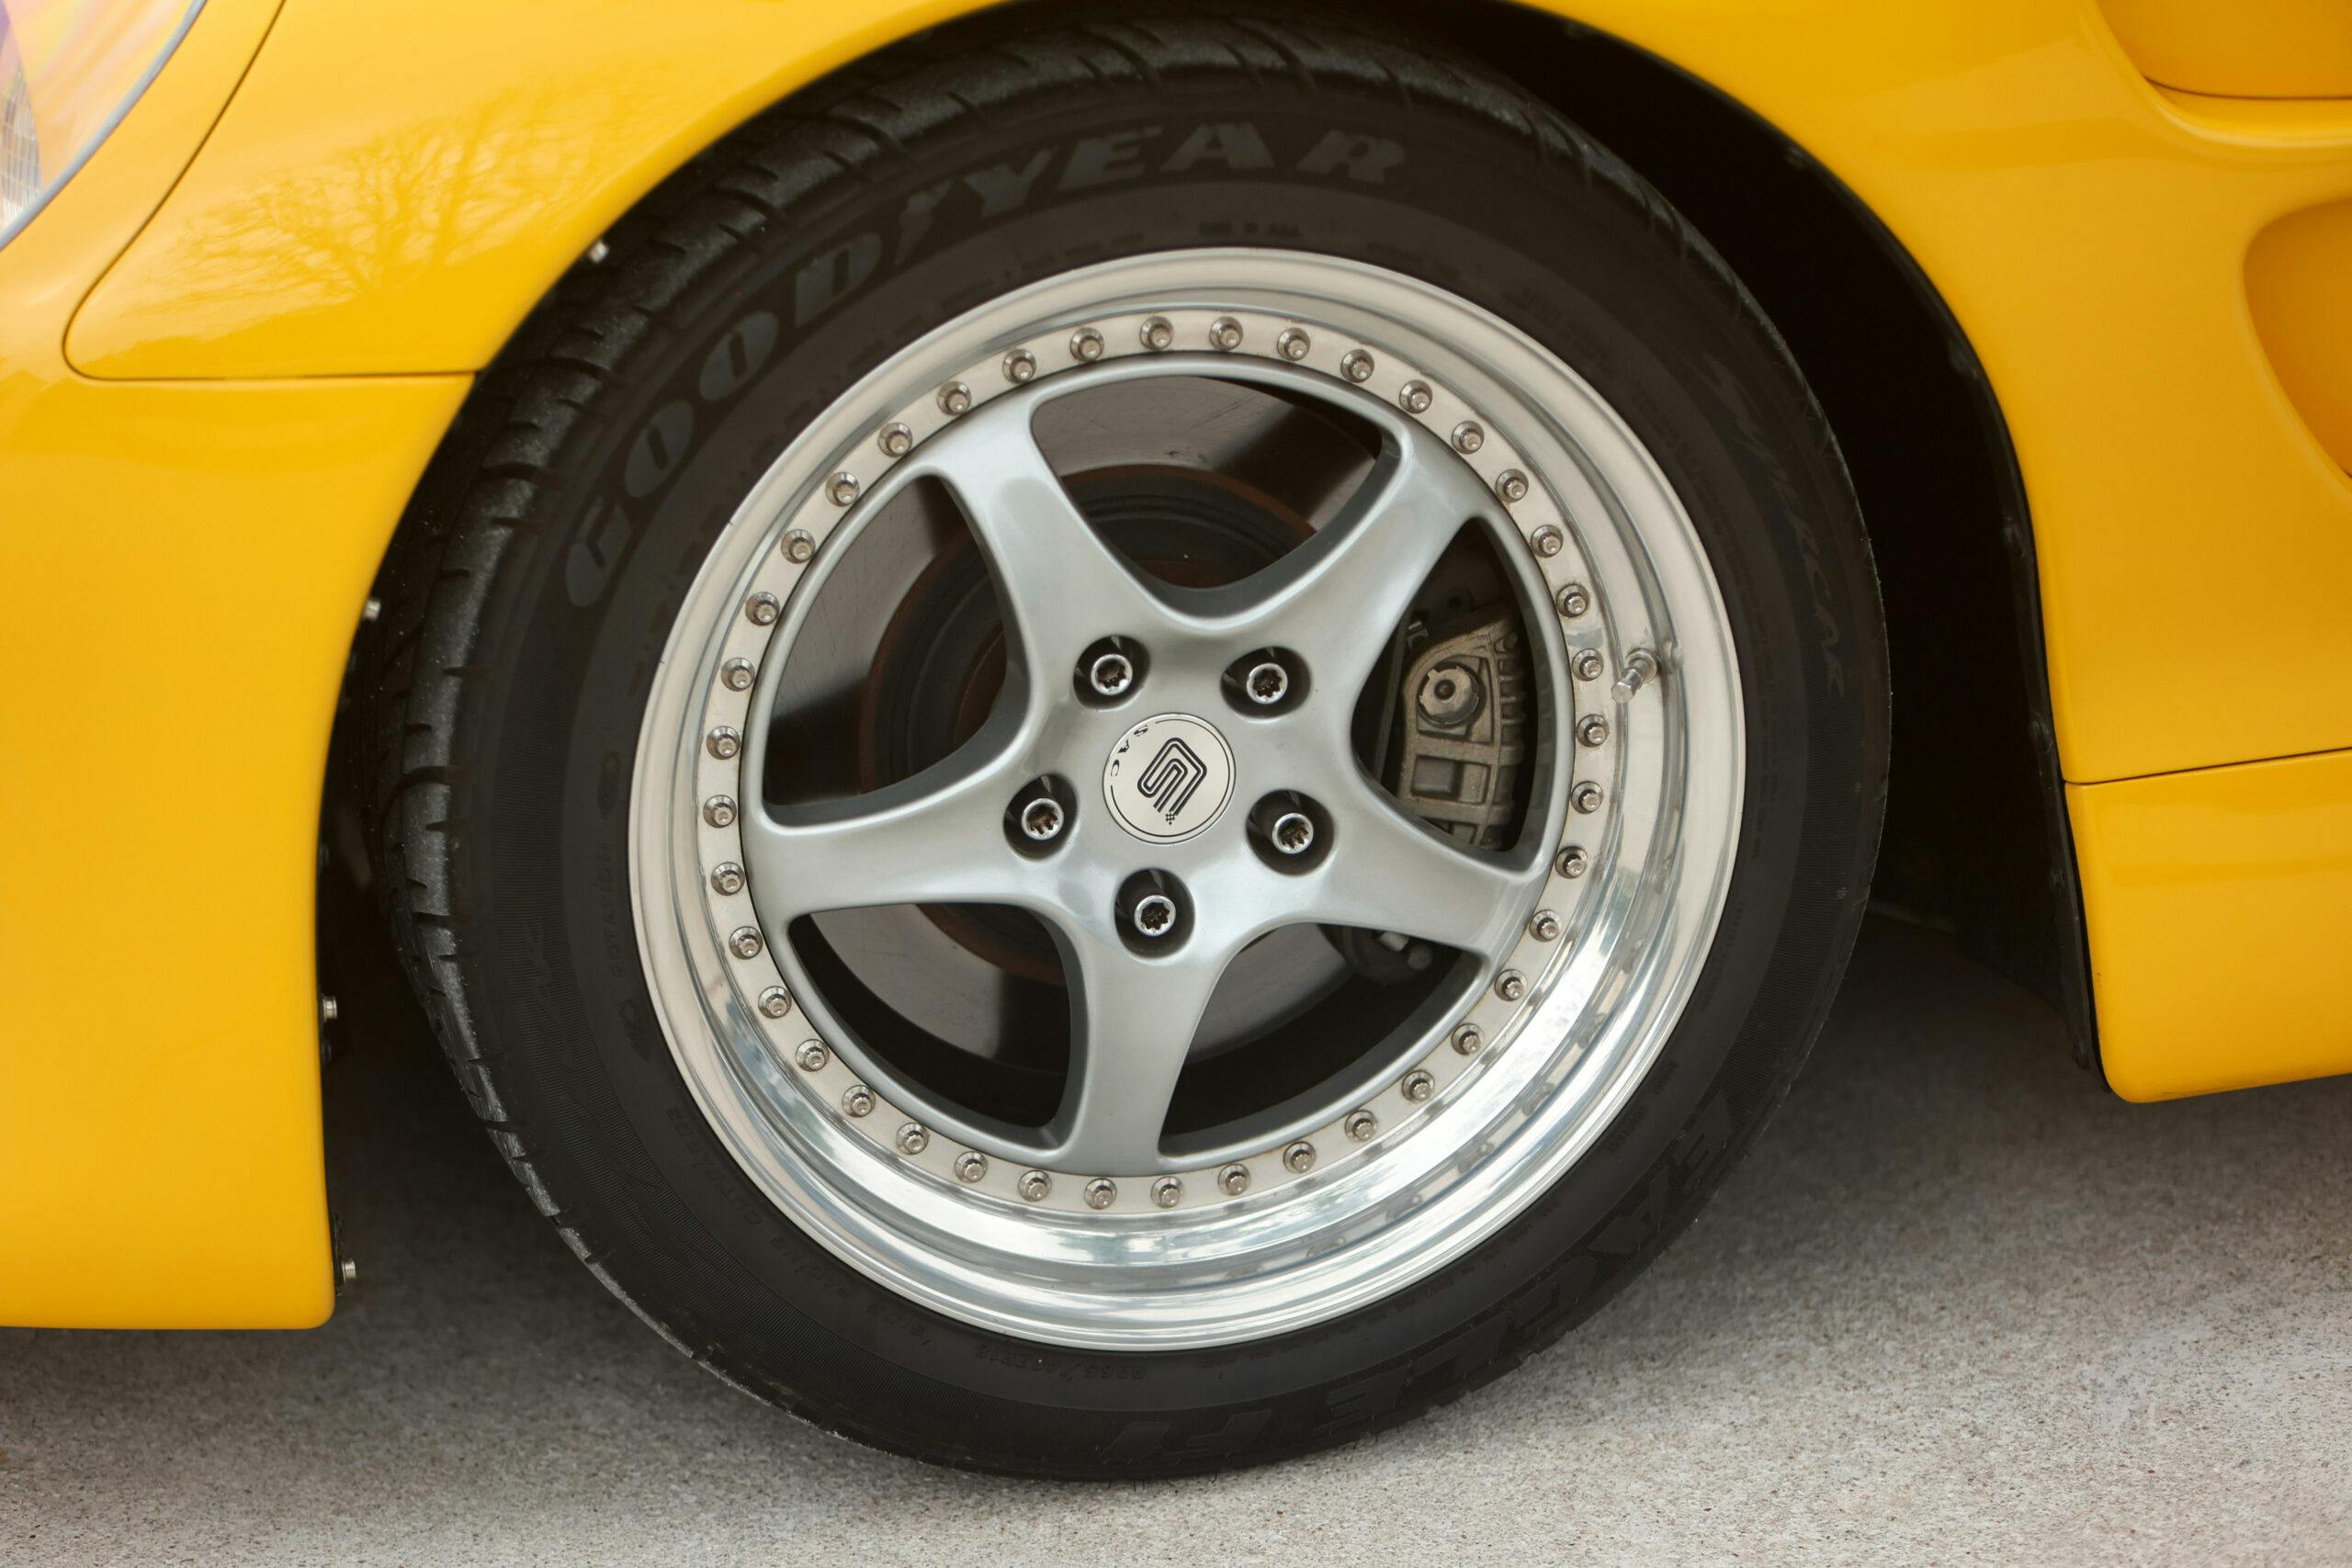 1999 Shelby Series 1 wheel tire